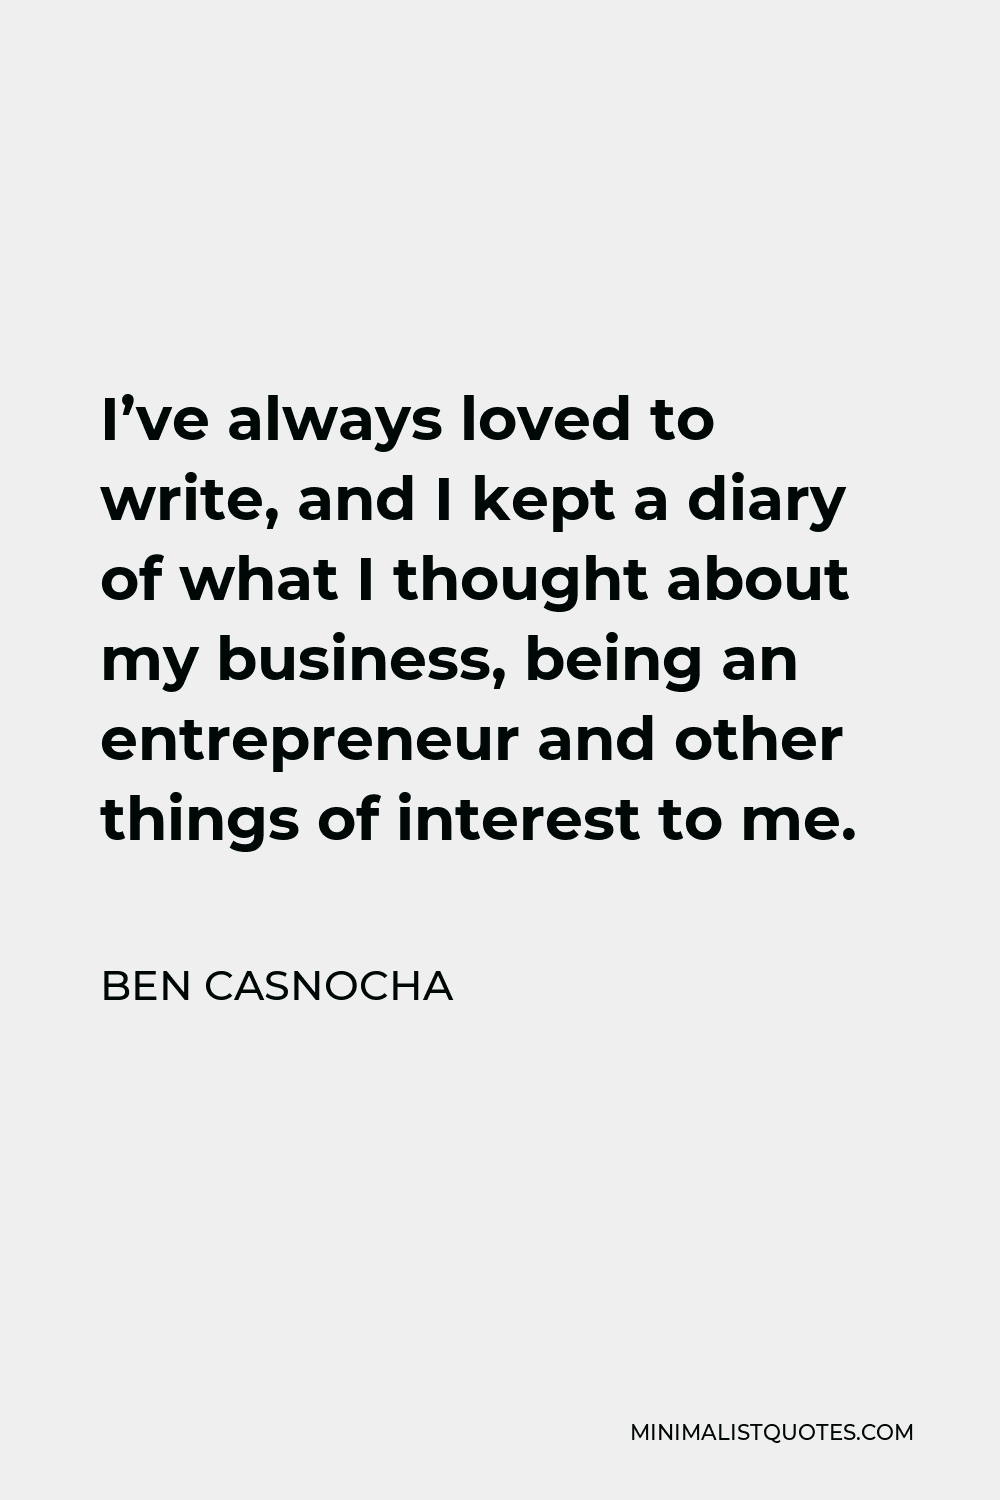 Ben Casnocha Quote - I’ve always loved to write, and I kept a diary of what I thought about my business, being an entrepreneur and other things of interest to me.